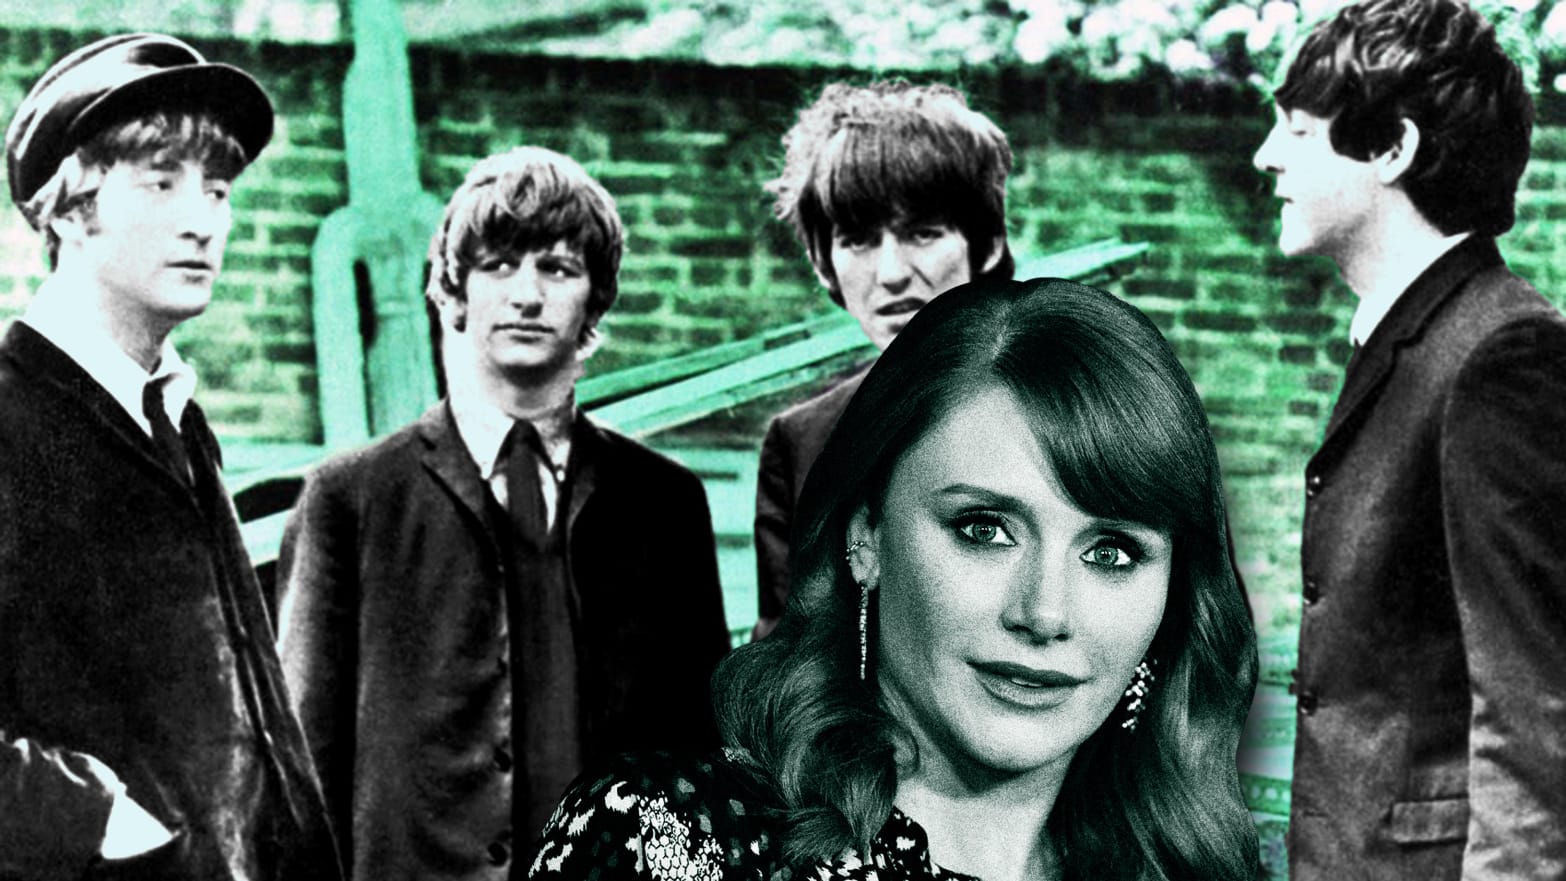 An illustration including photos of The Beatles and Bryce Dallas Howard